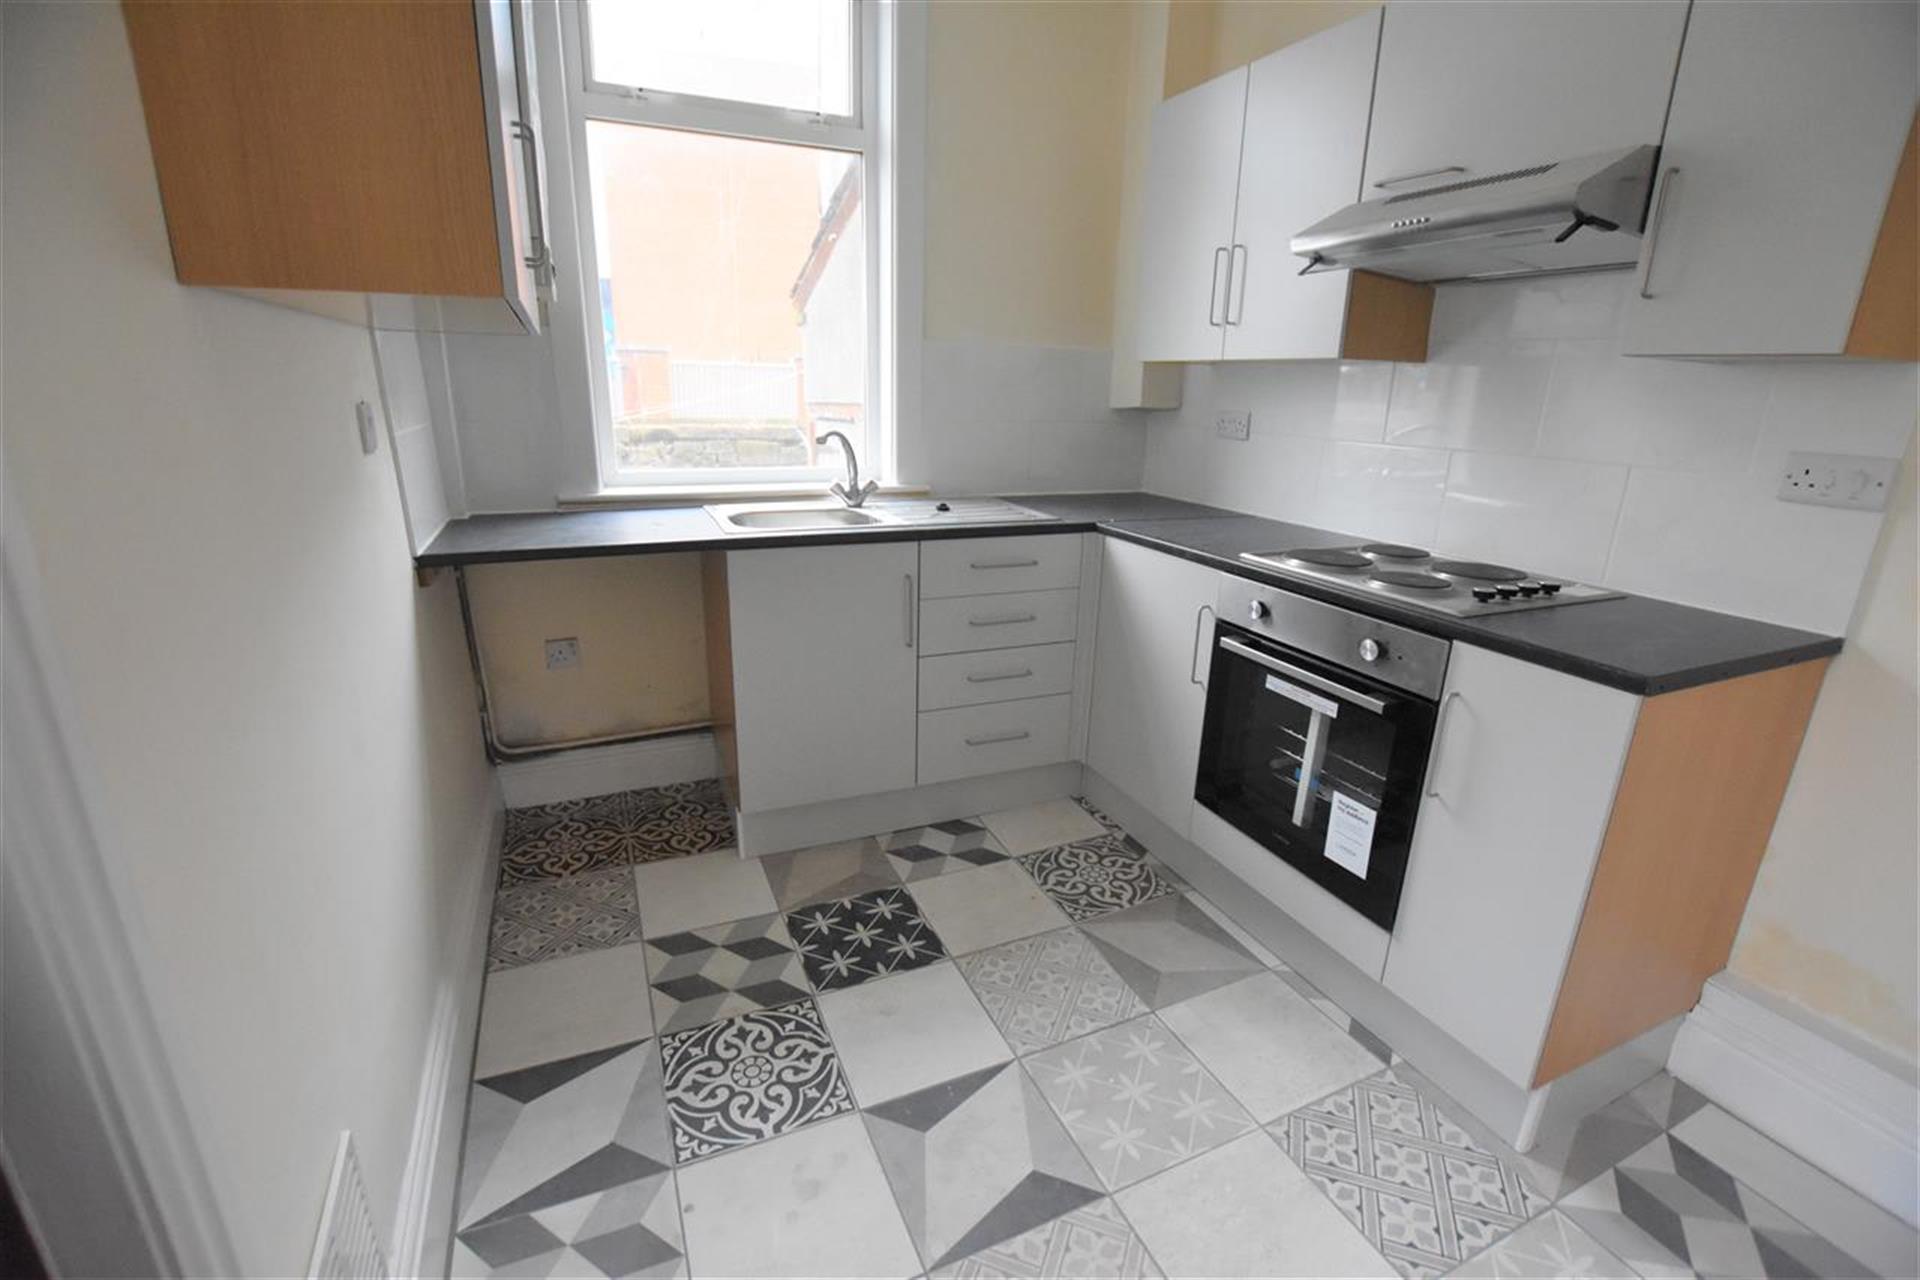 3 Bedroom End Terraced House To Rent - Kitchen